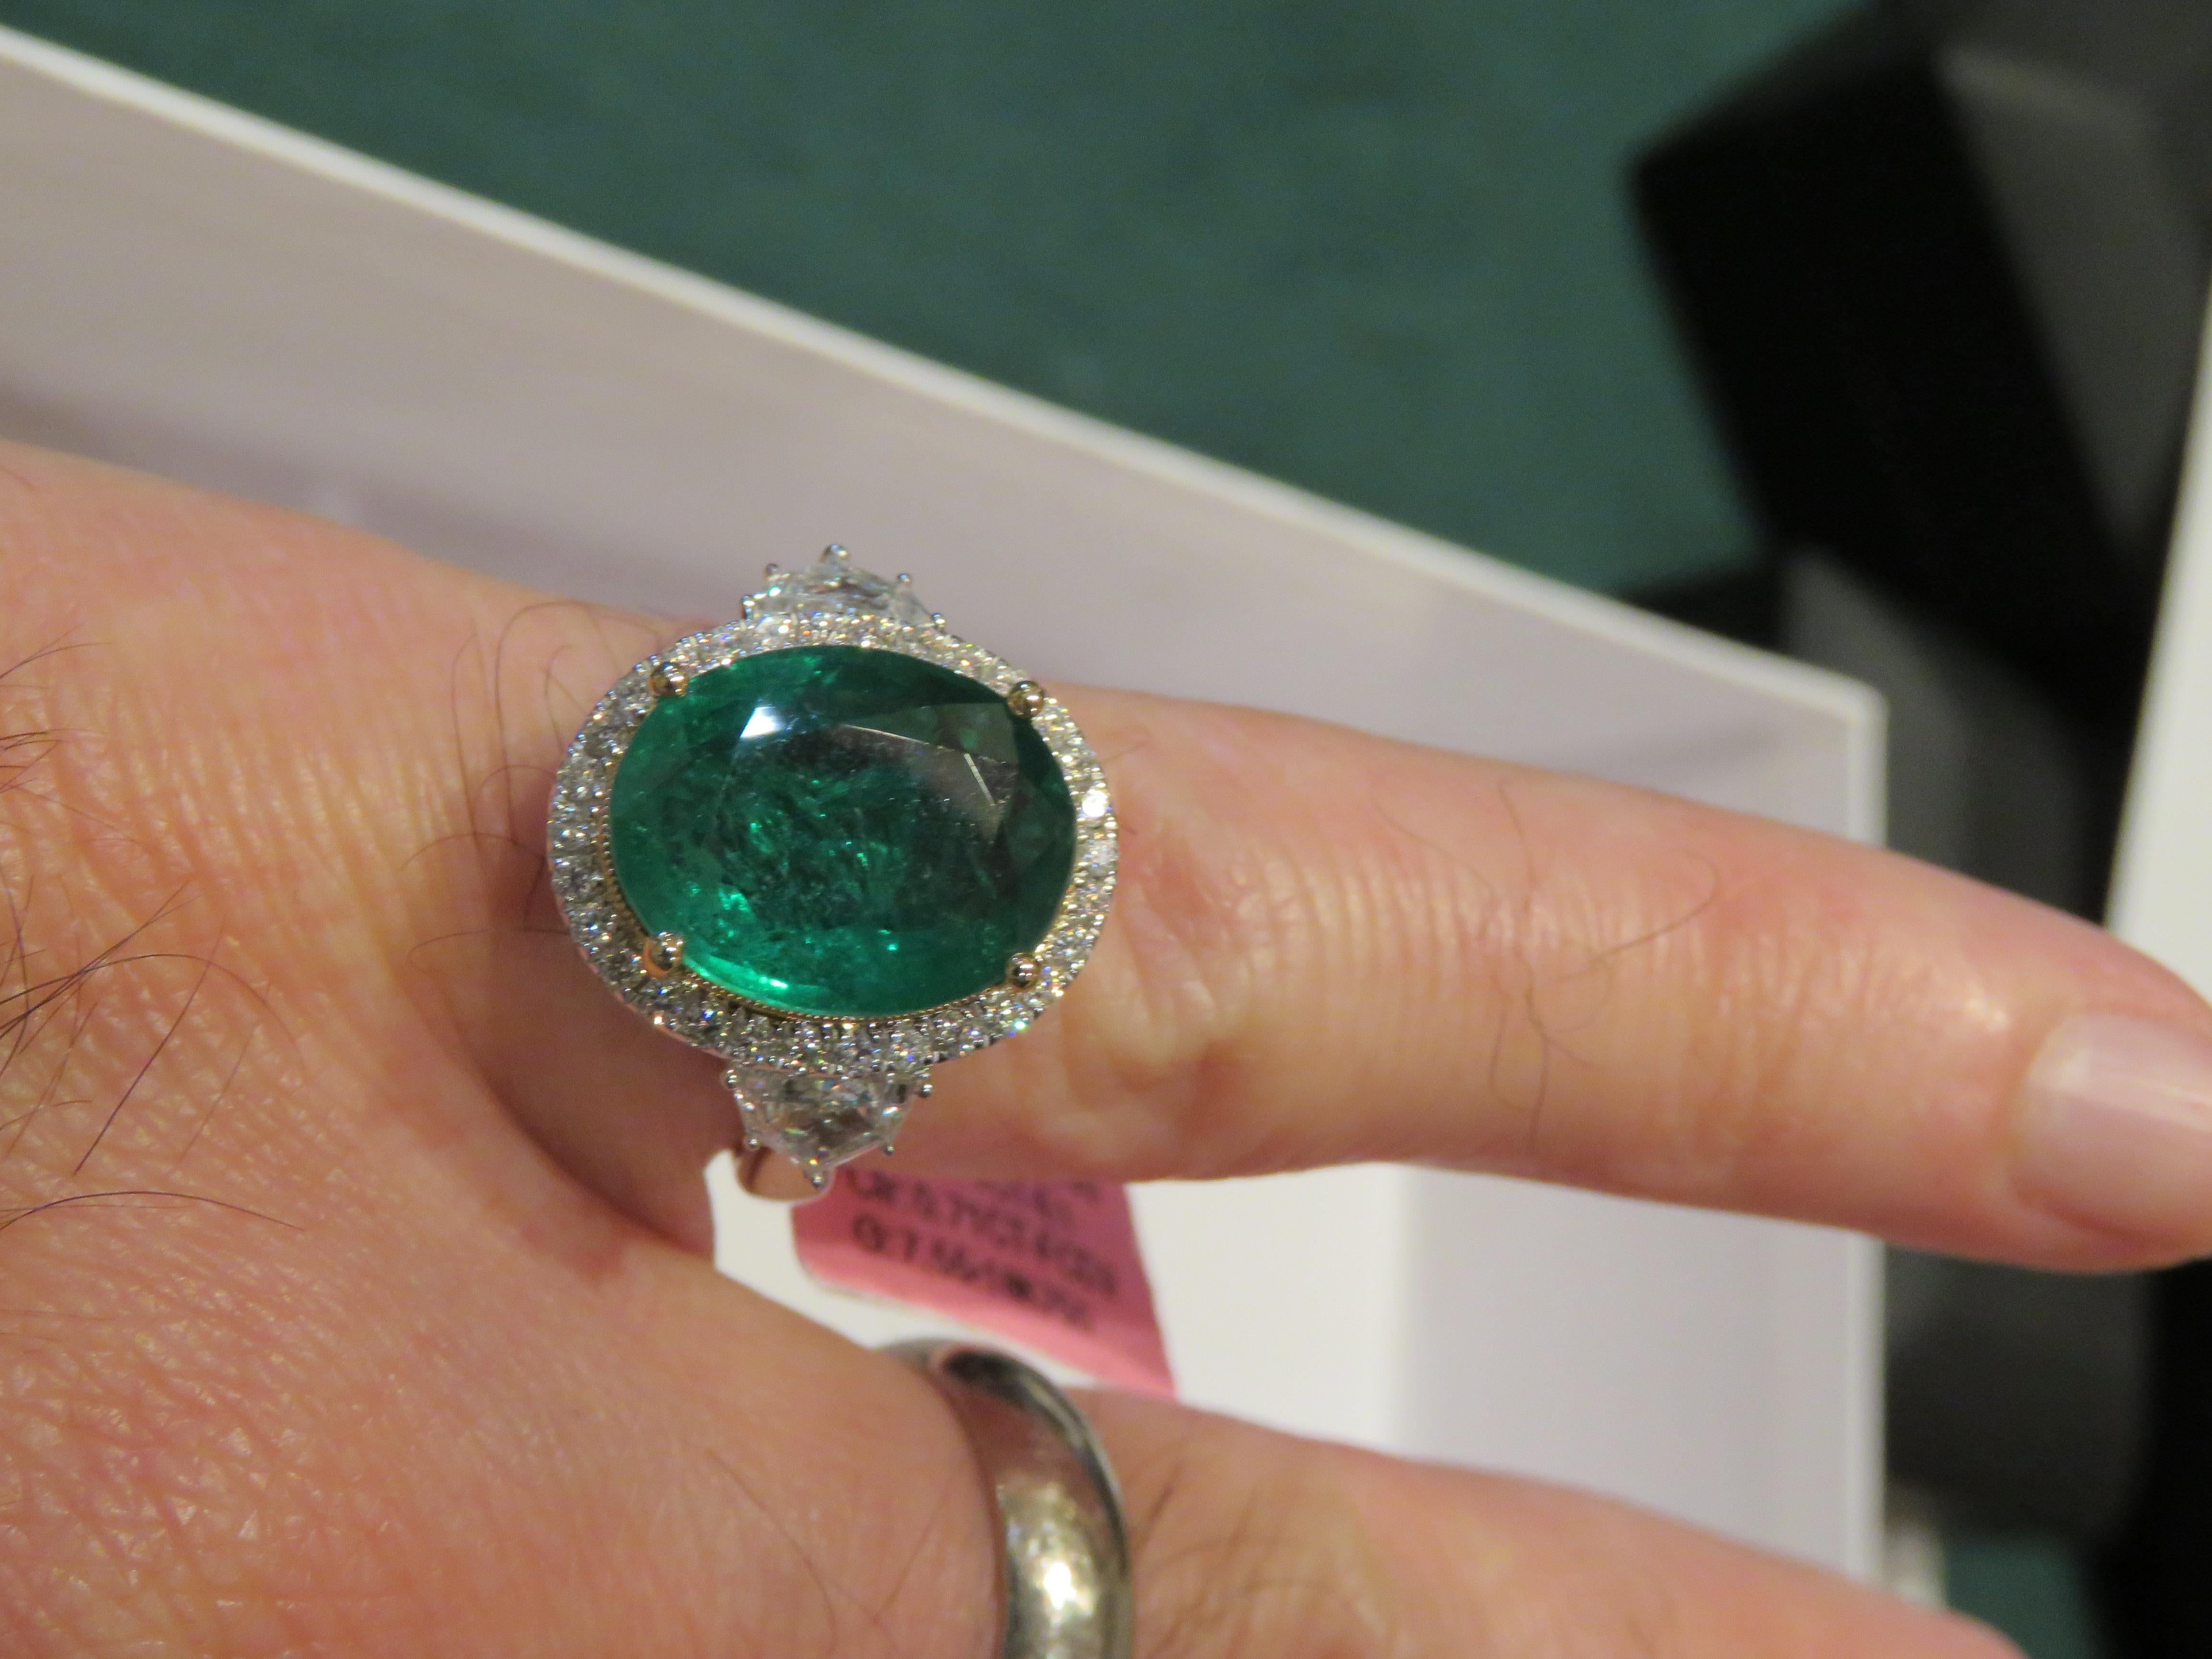 The Following Item we are offering is a Rare Important Radiant 18KT Gold Large Fancy Glittering Large Emerald surrounded with a Halo of Diamonds and Diamond Baguettes on side.  Ring is comprised of A LARGE Gorgeous Fancy Emerald sitting atop and